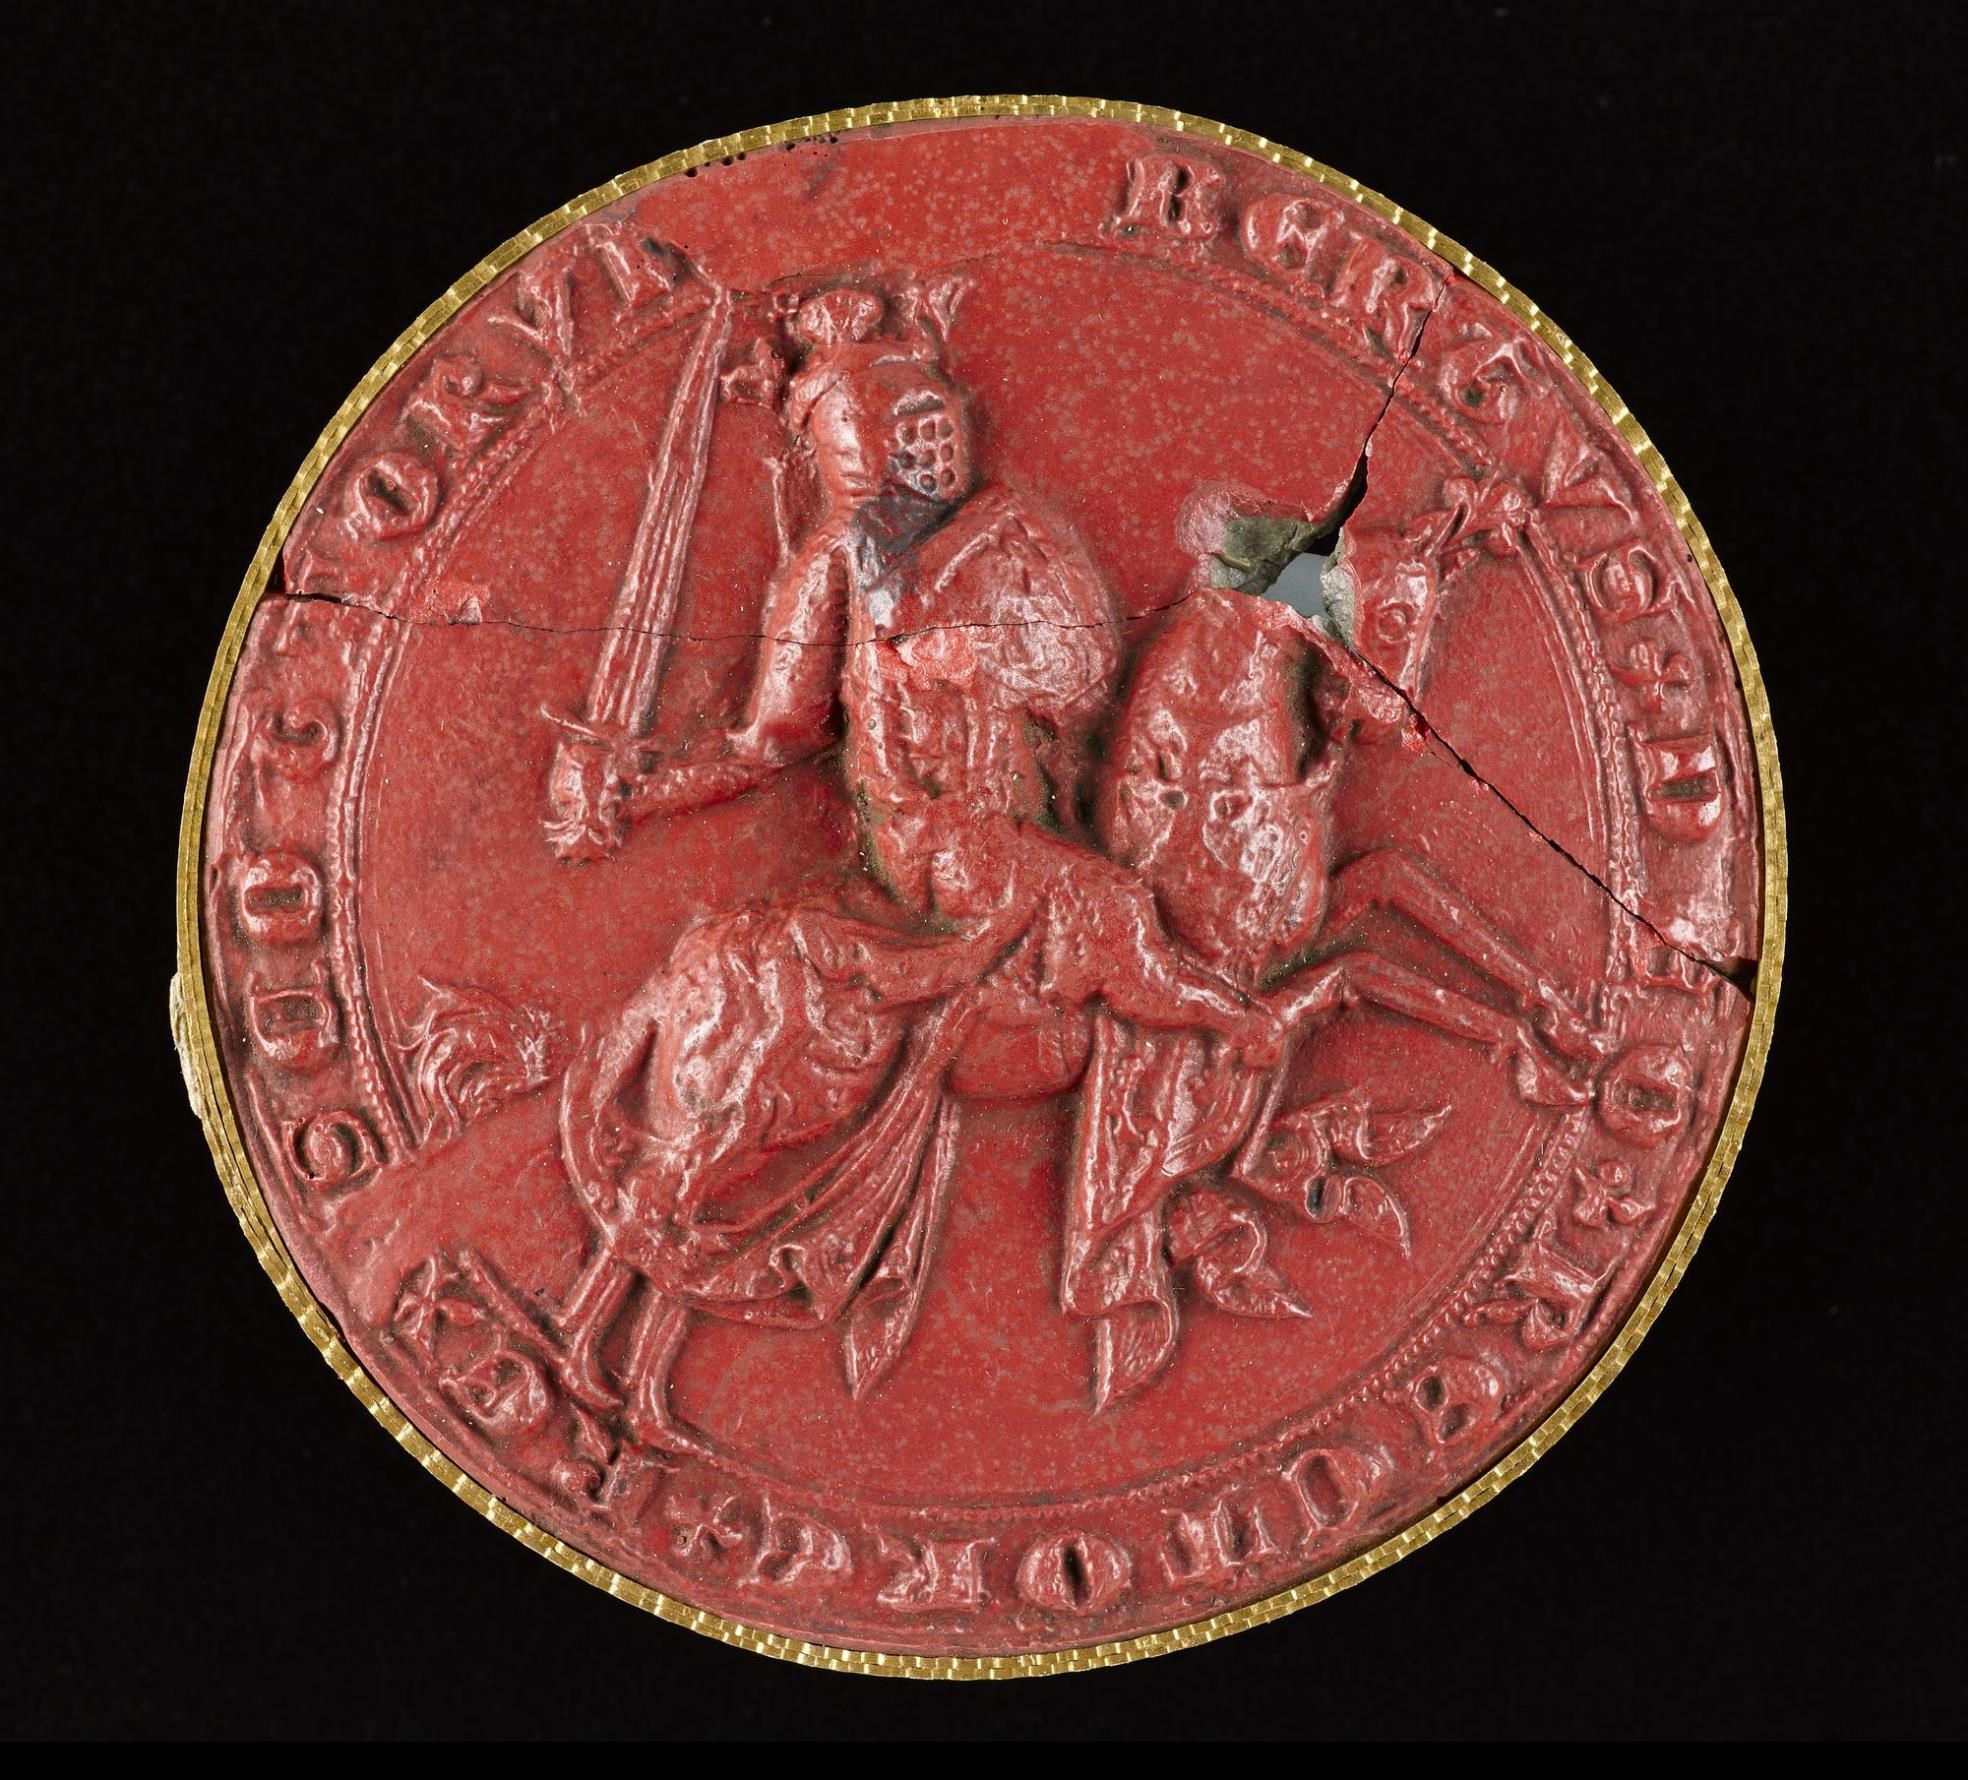 Red wax seal depicting a man, Robert Bruce, on a charging warhorse holding up a sword.